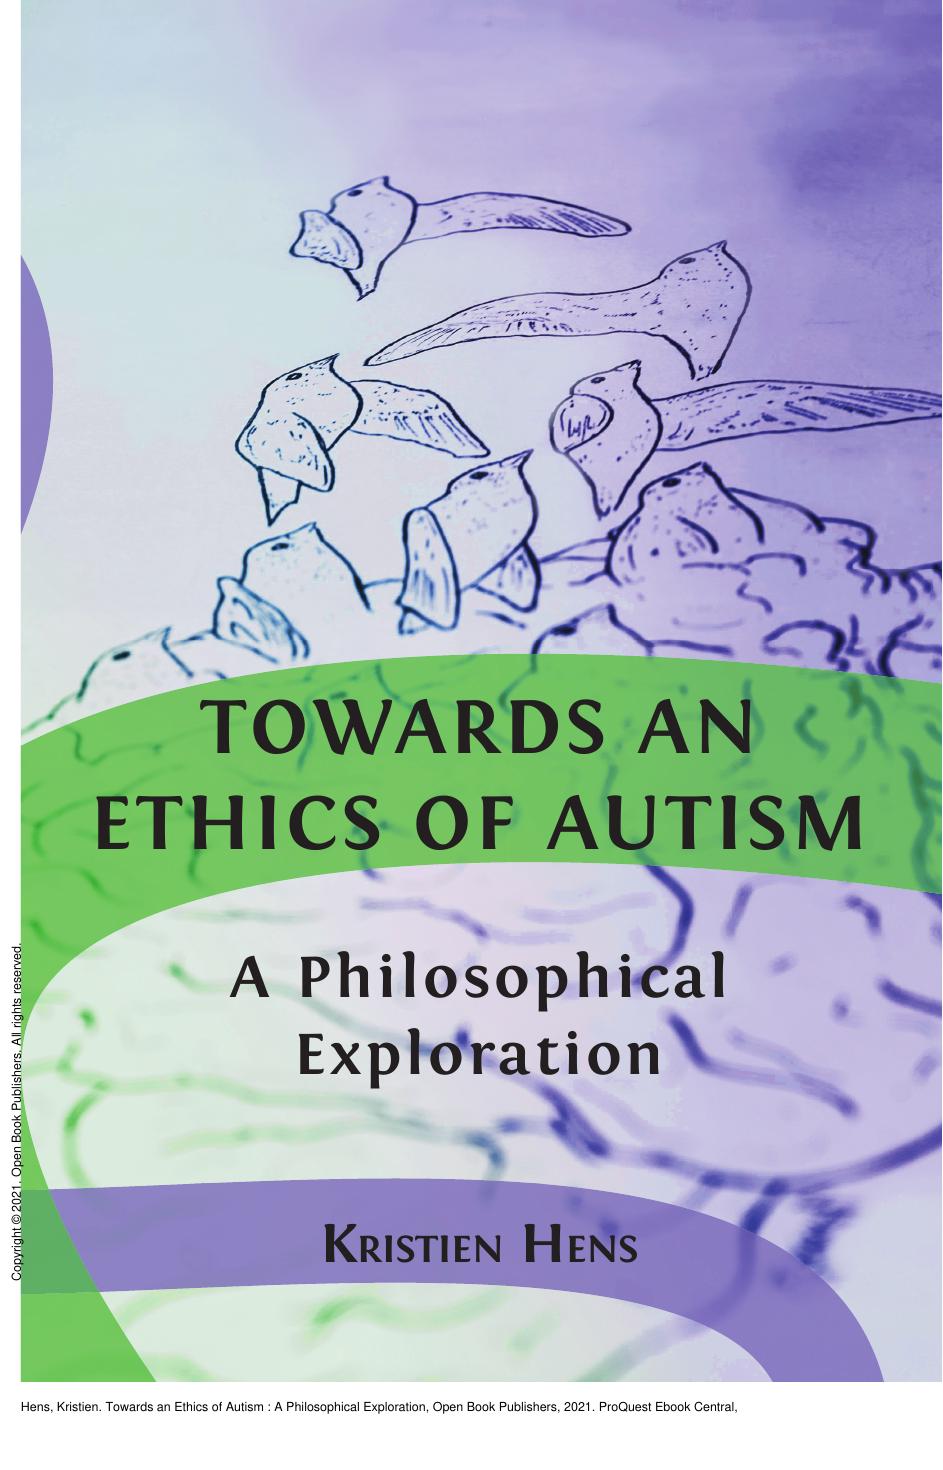 Towards an Ethics of Autism : A Philosophical Exploration by Kristien Hens